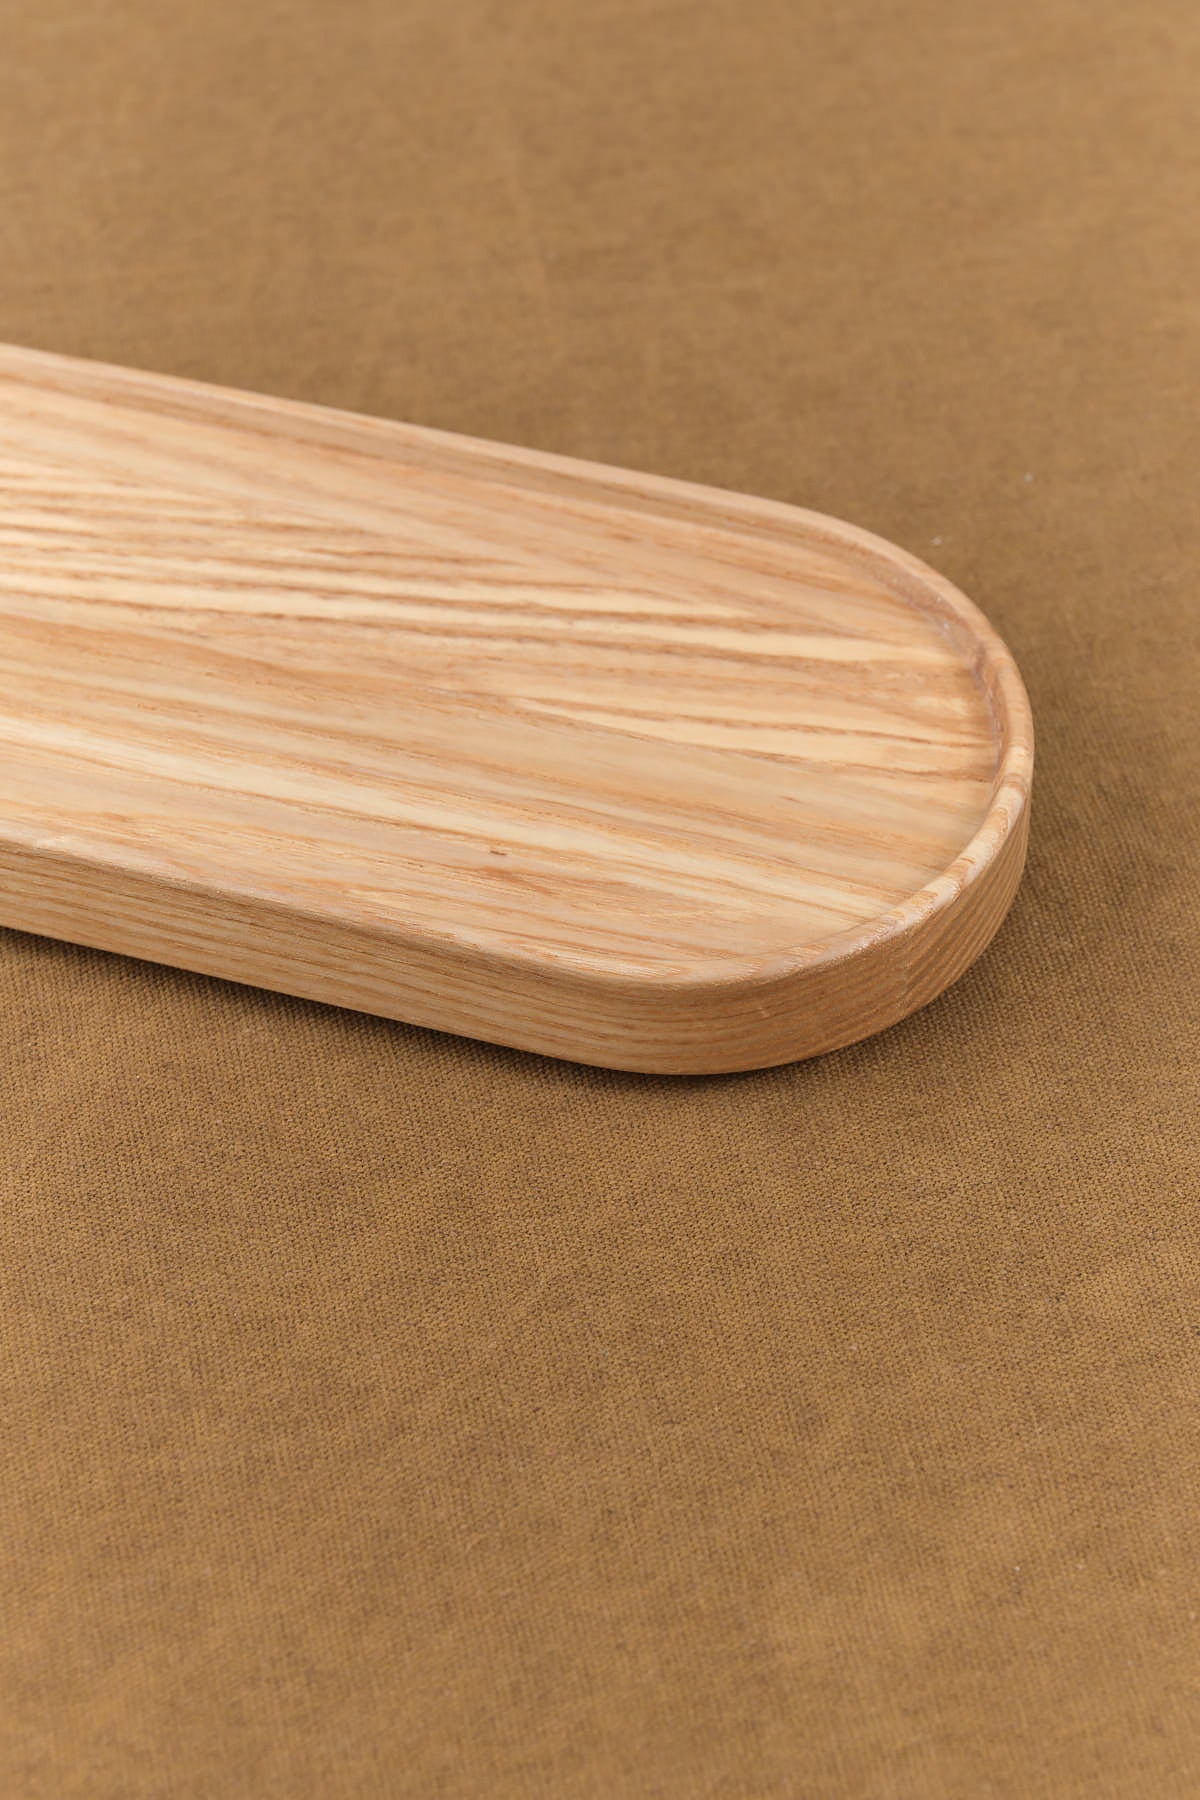 Closeup of Long Ash Wooden Oval Tray